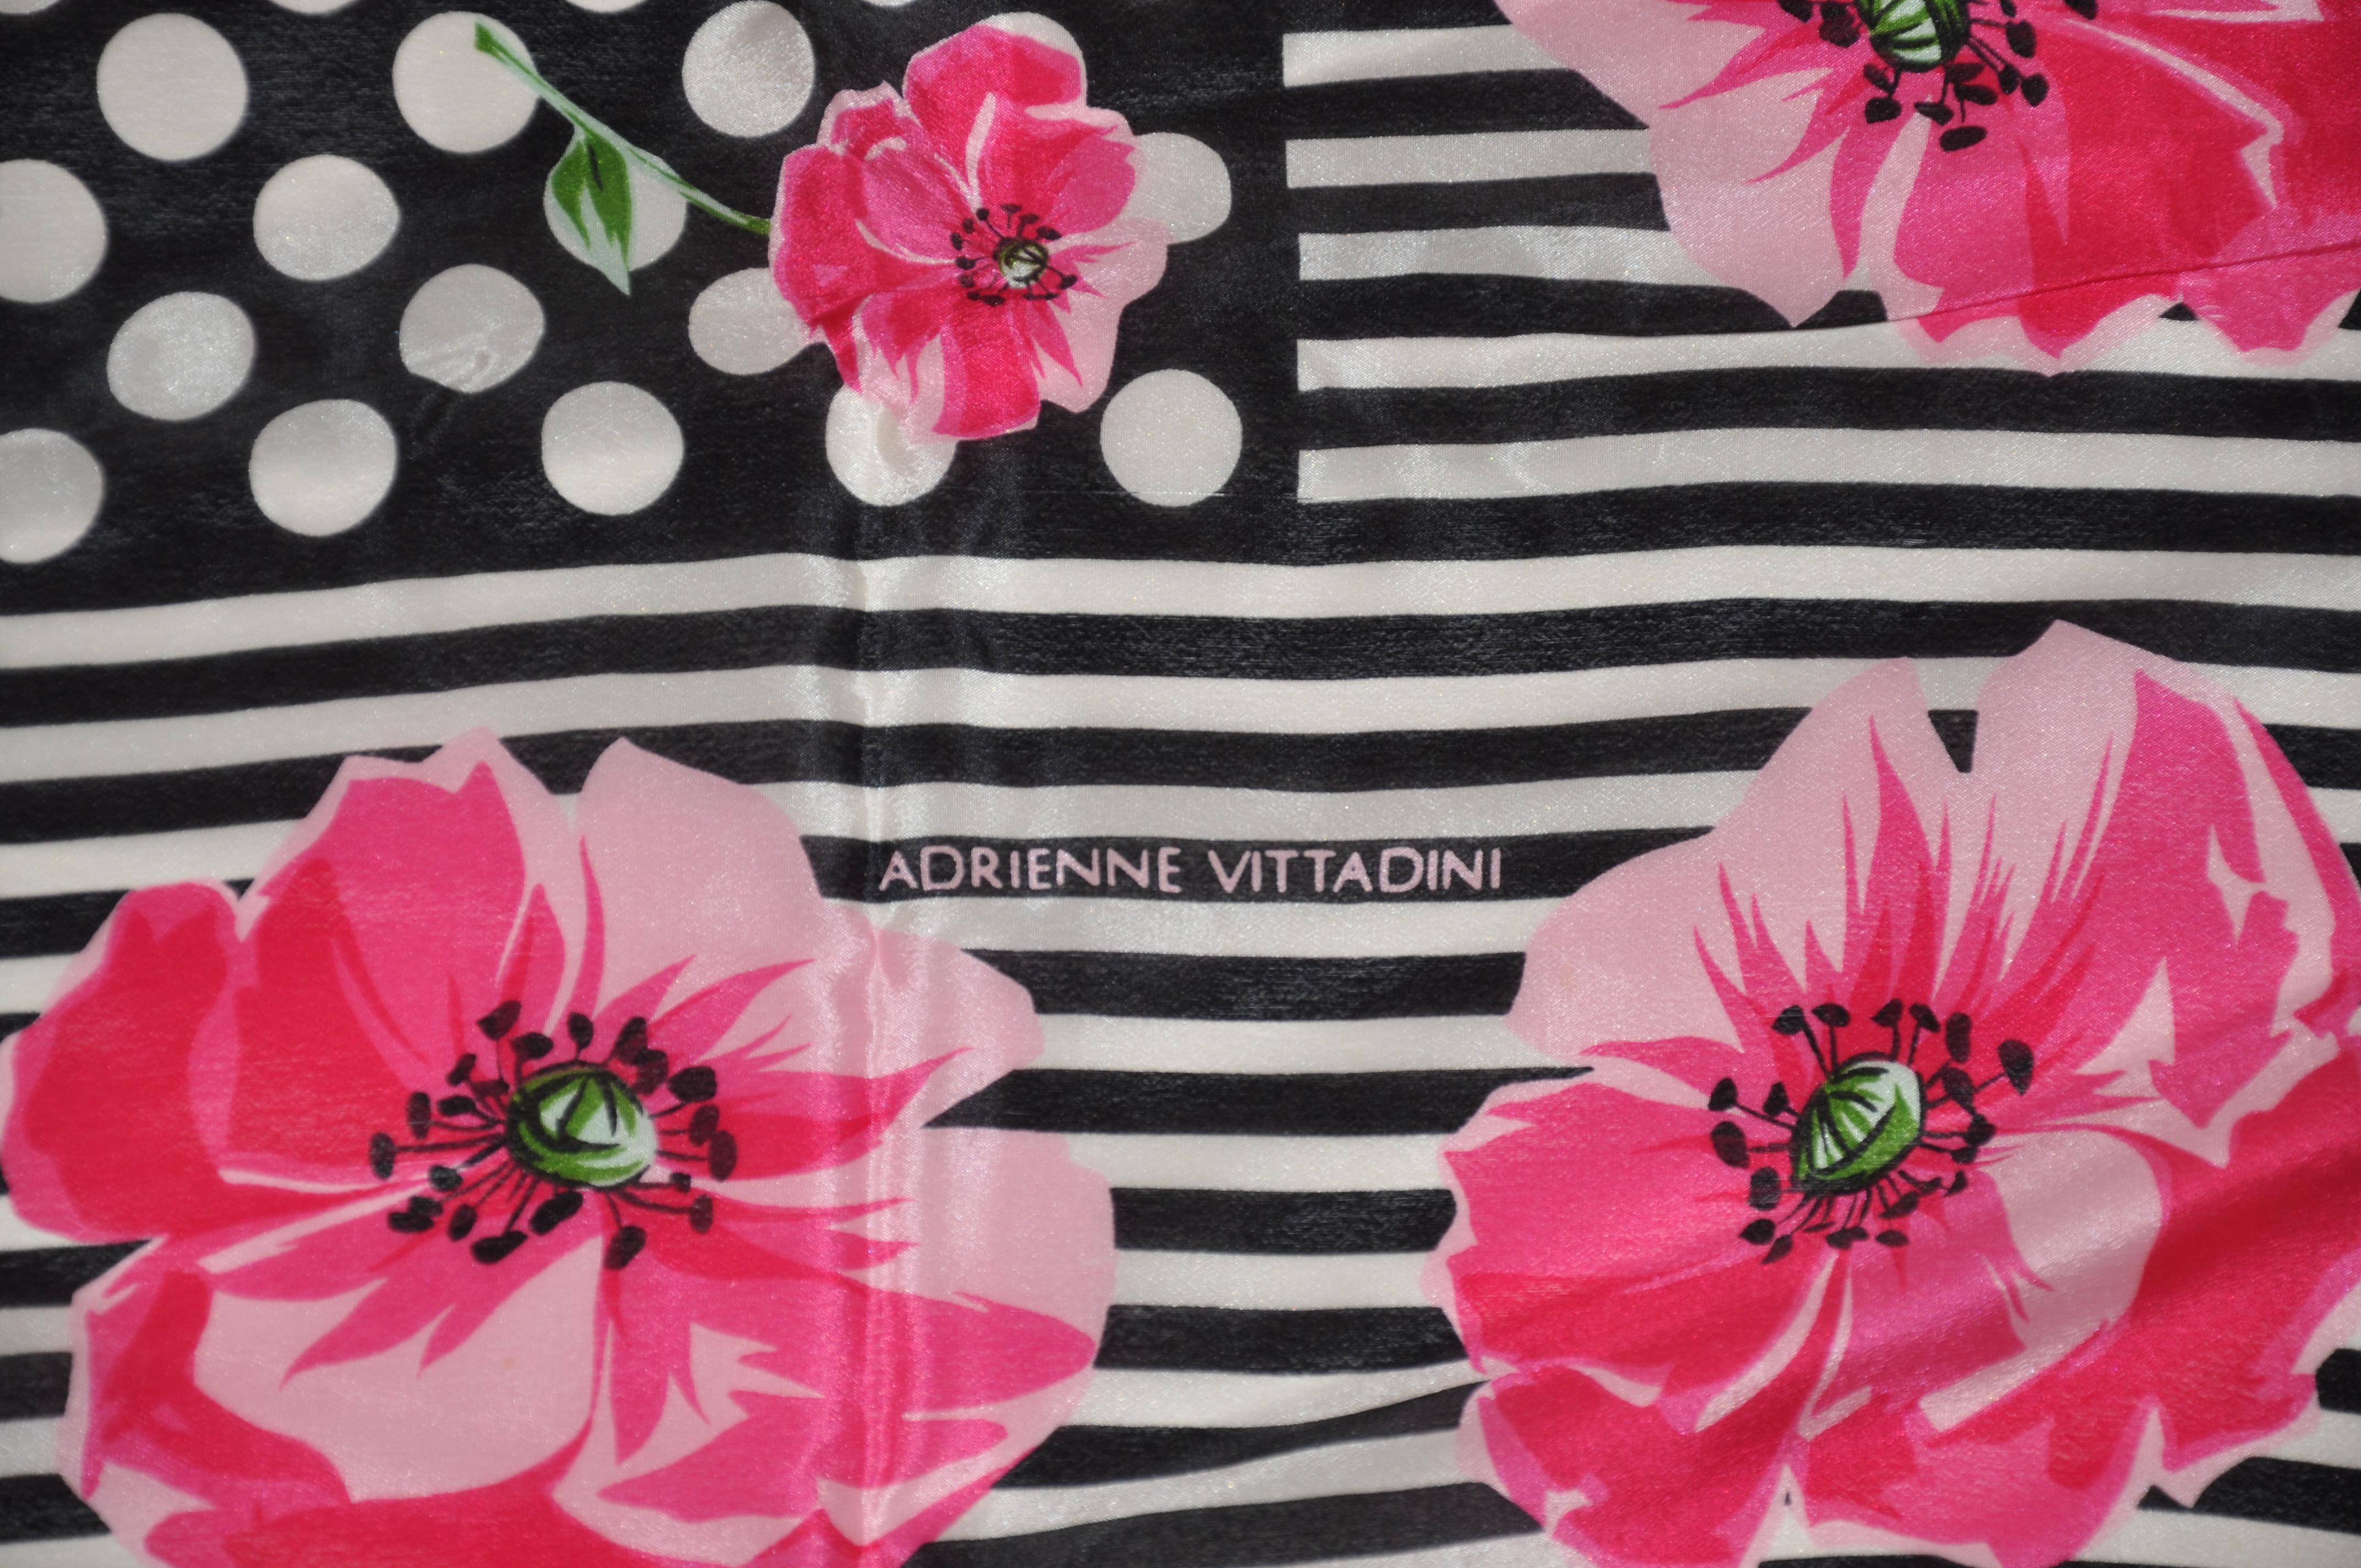 Adrienne Vittadini Popping Fuchsia Florals Among Black & White Silk Scarf For Sale 1